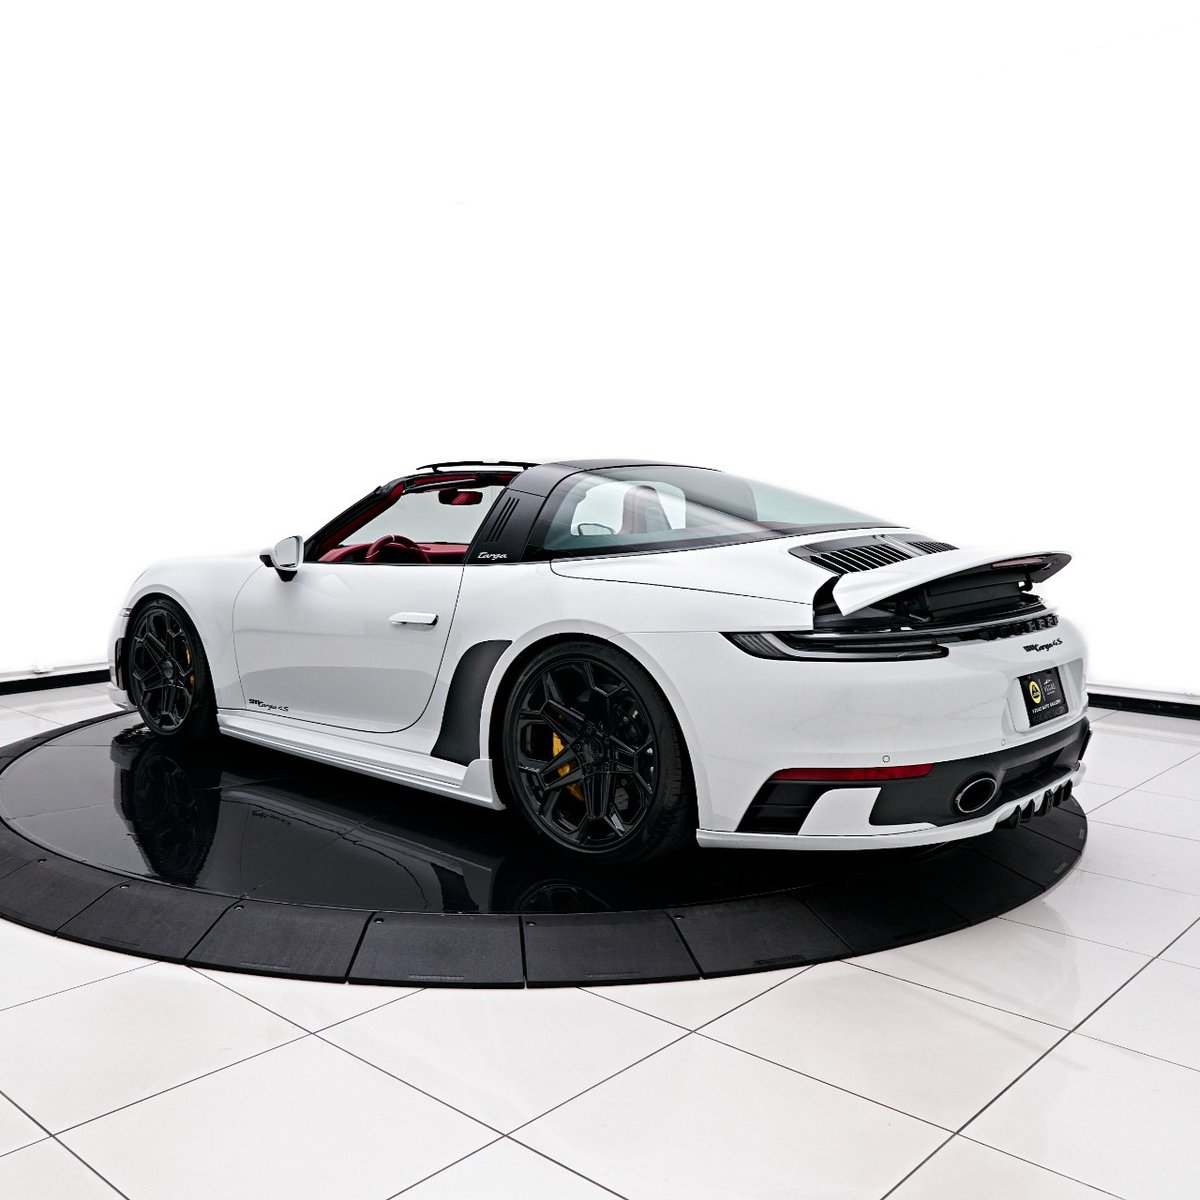 2021 Porsche 911 Targa 4S upgraded By TECHART 🔥 | Asking Price: $249,800
-
For More Info: bit.ly/3J4Pwf9